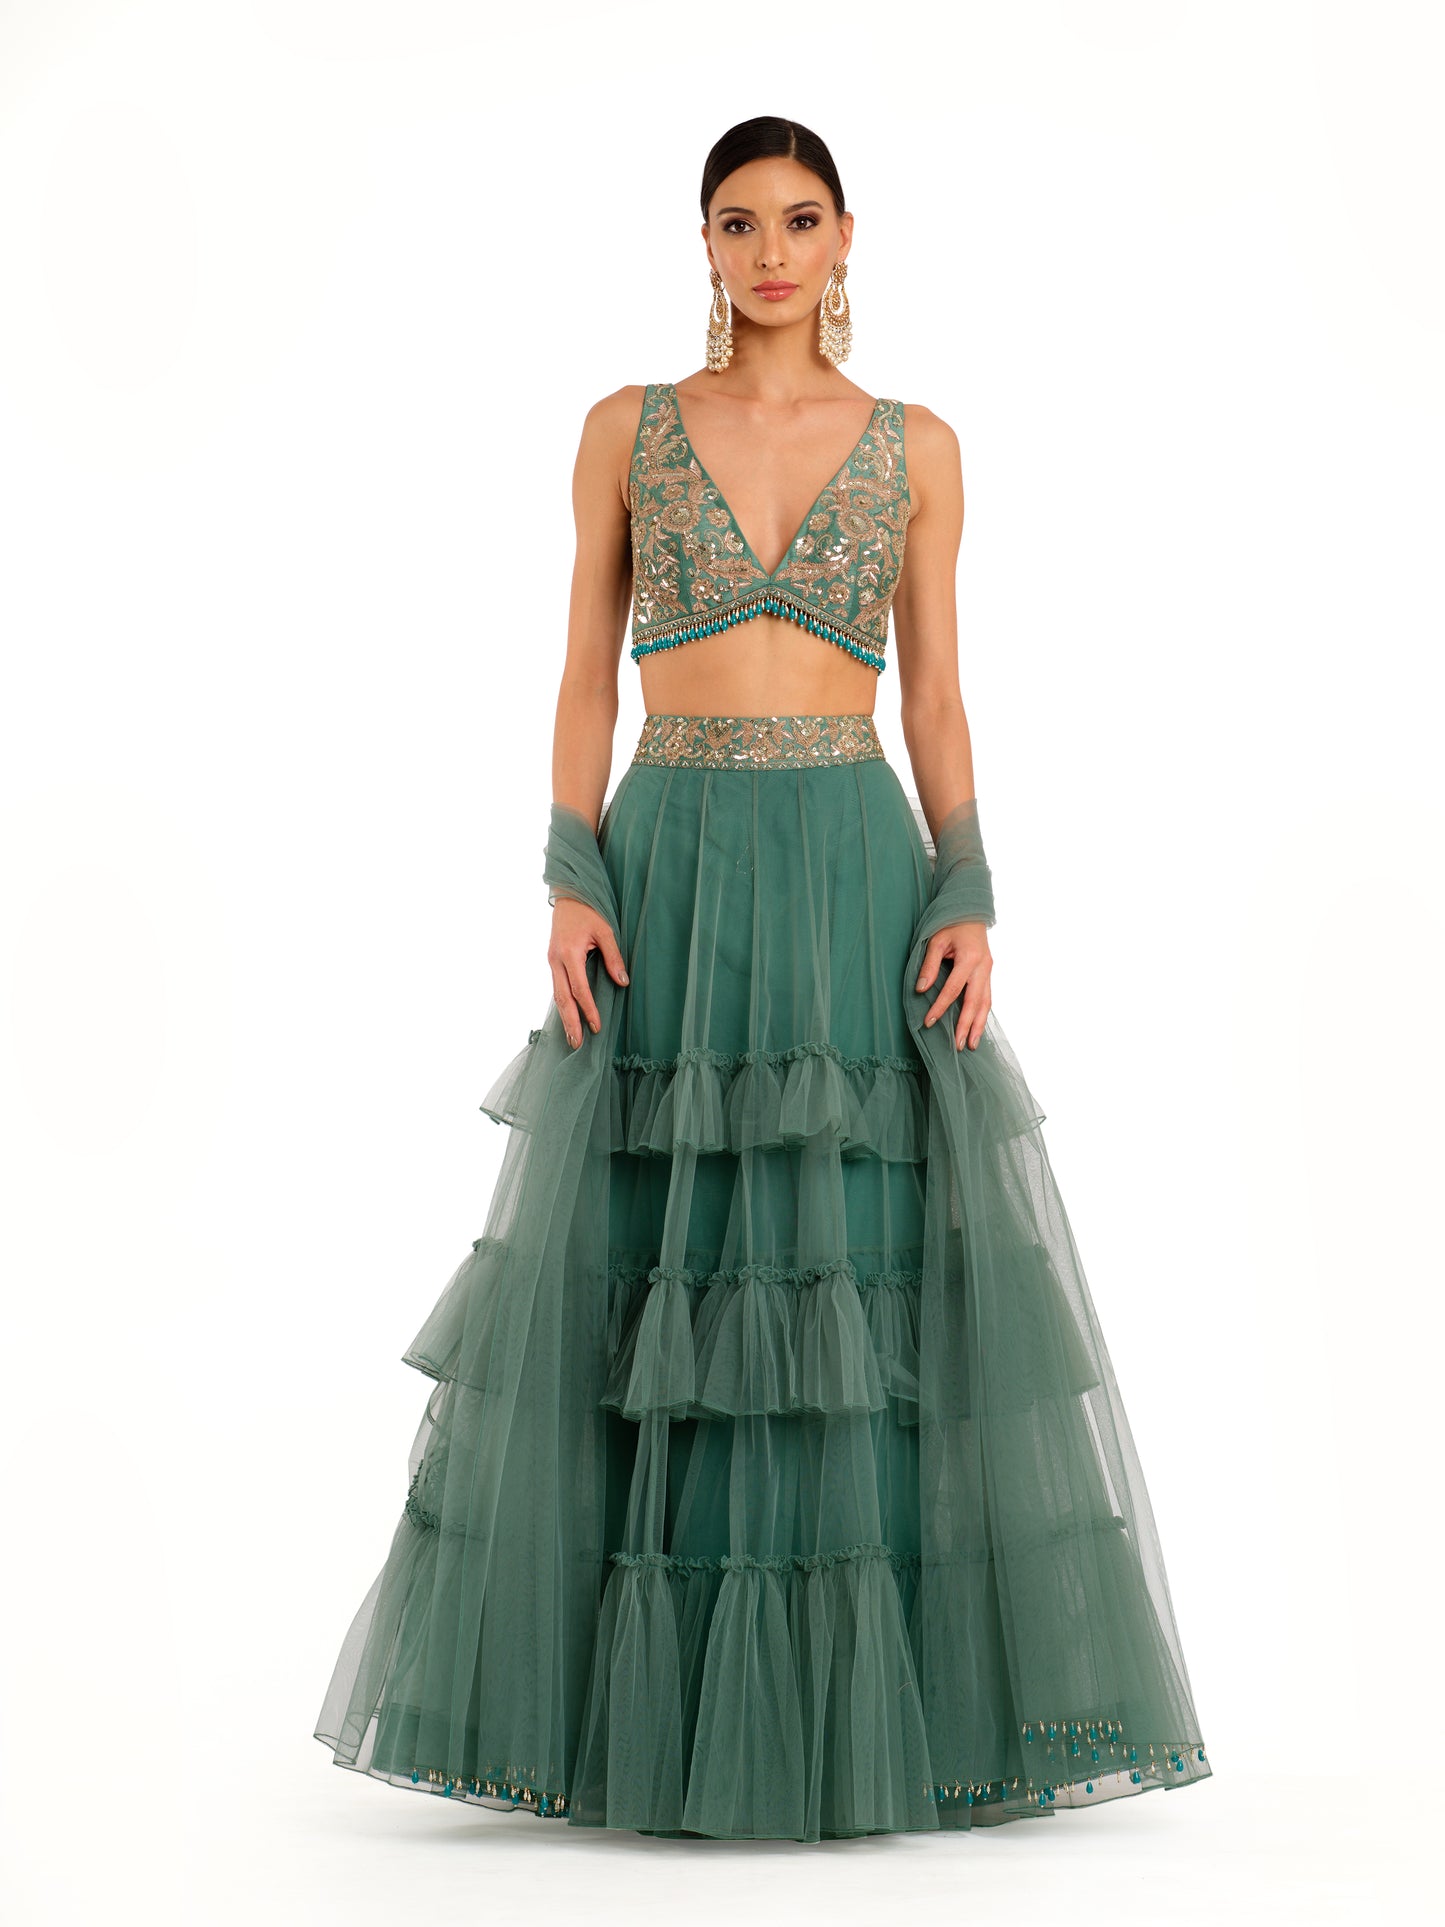 Emerald Tulle Lehenga with Embroidered Blouse